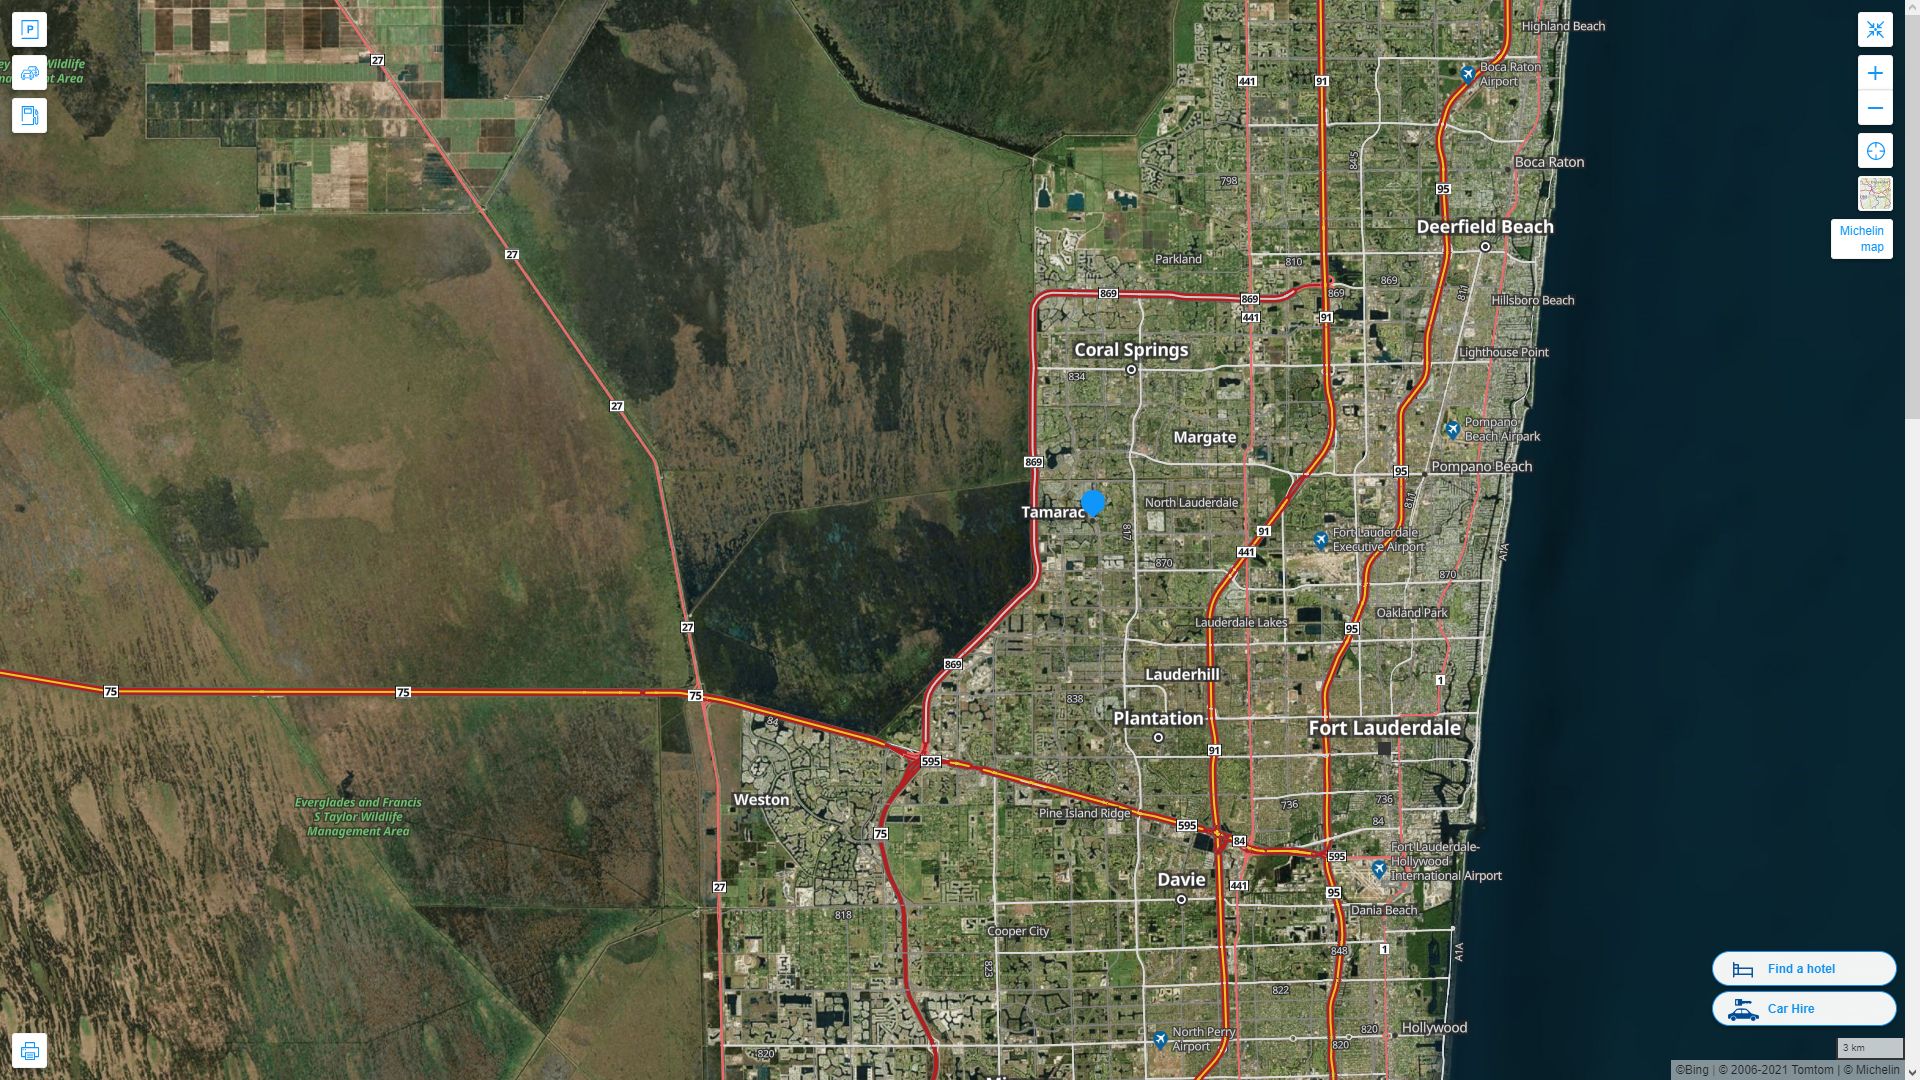 Tamarac Florida Highway and Road Map with Satellite View